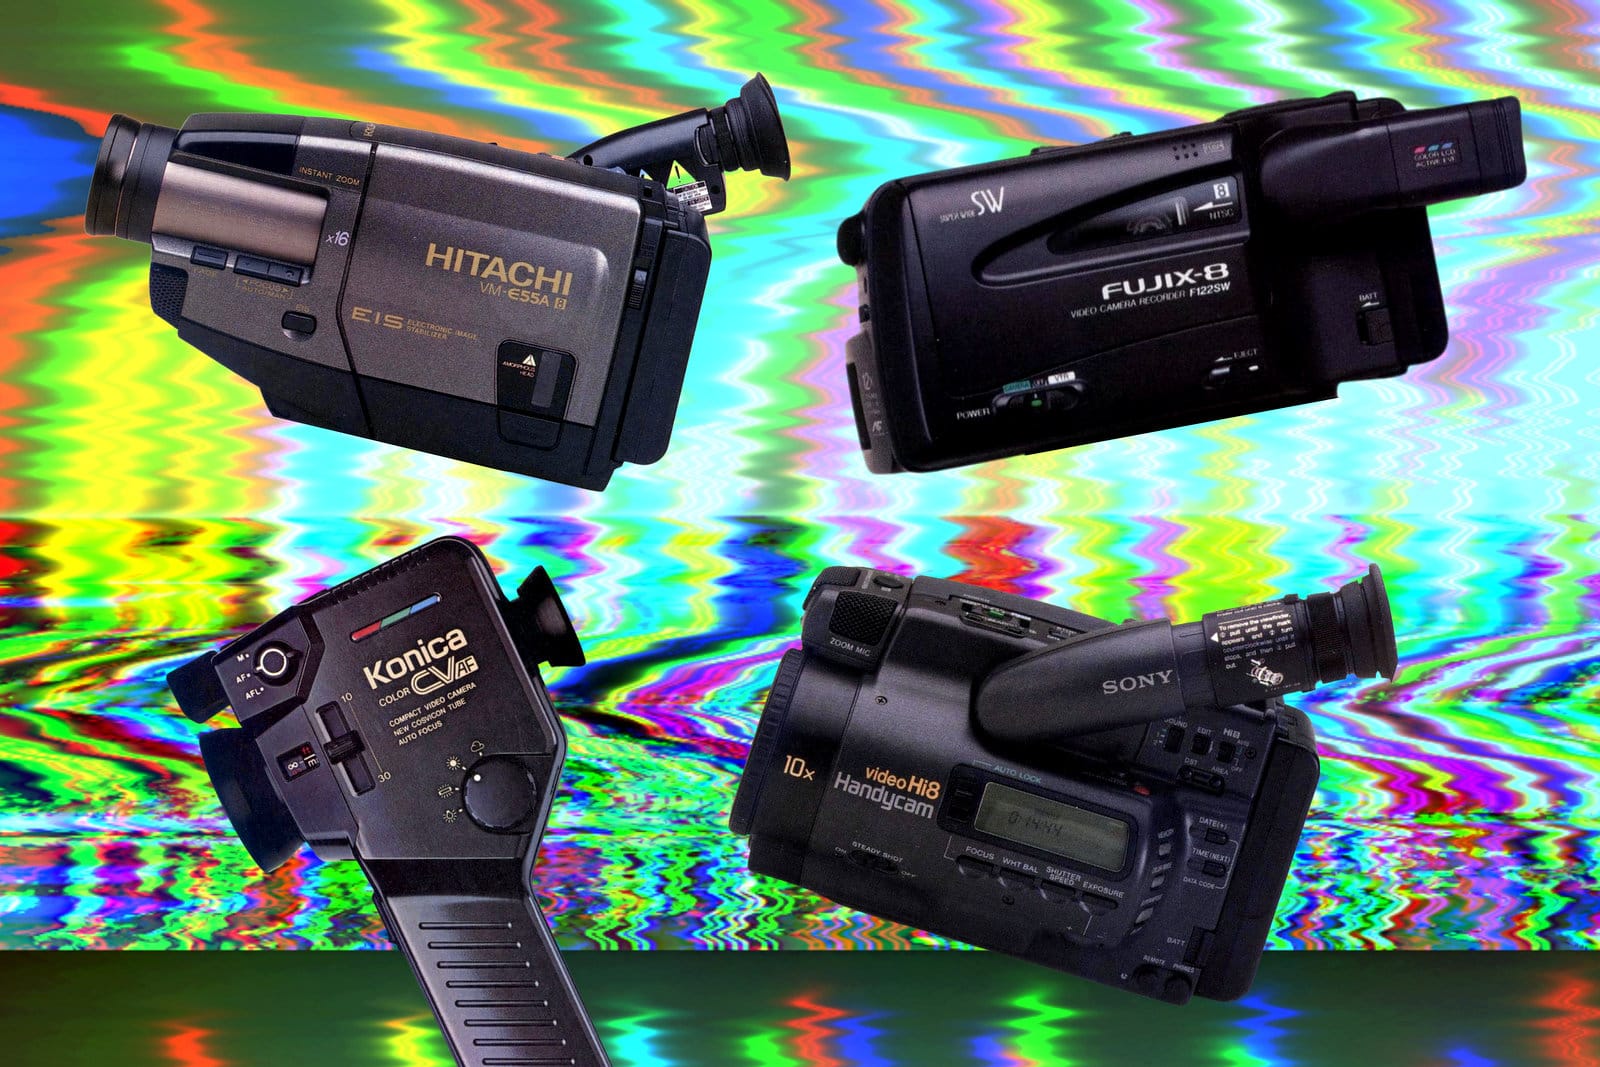 How To Get Cool Oldschool Camcorder Effects On Videos